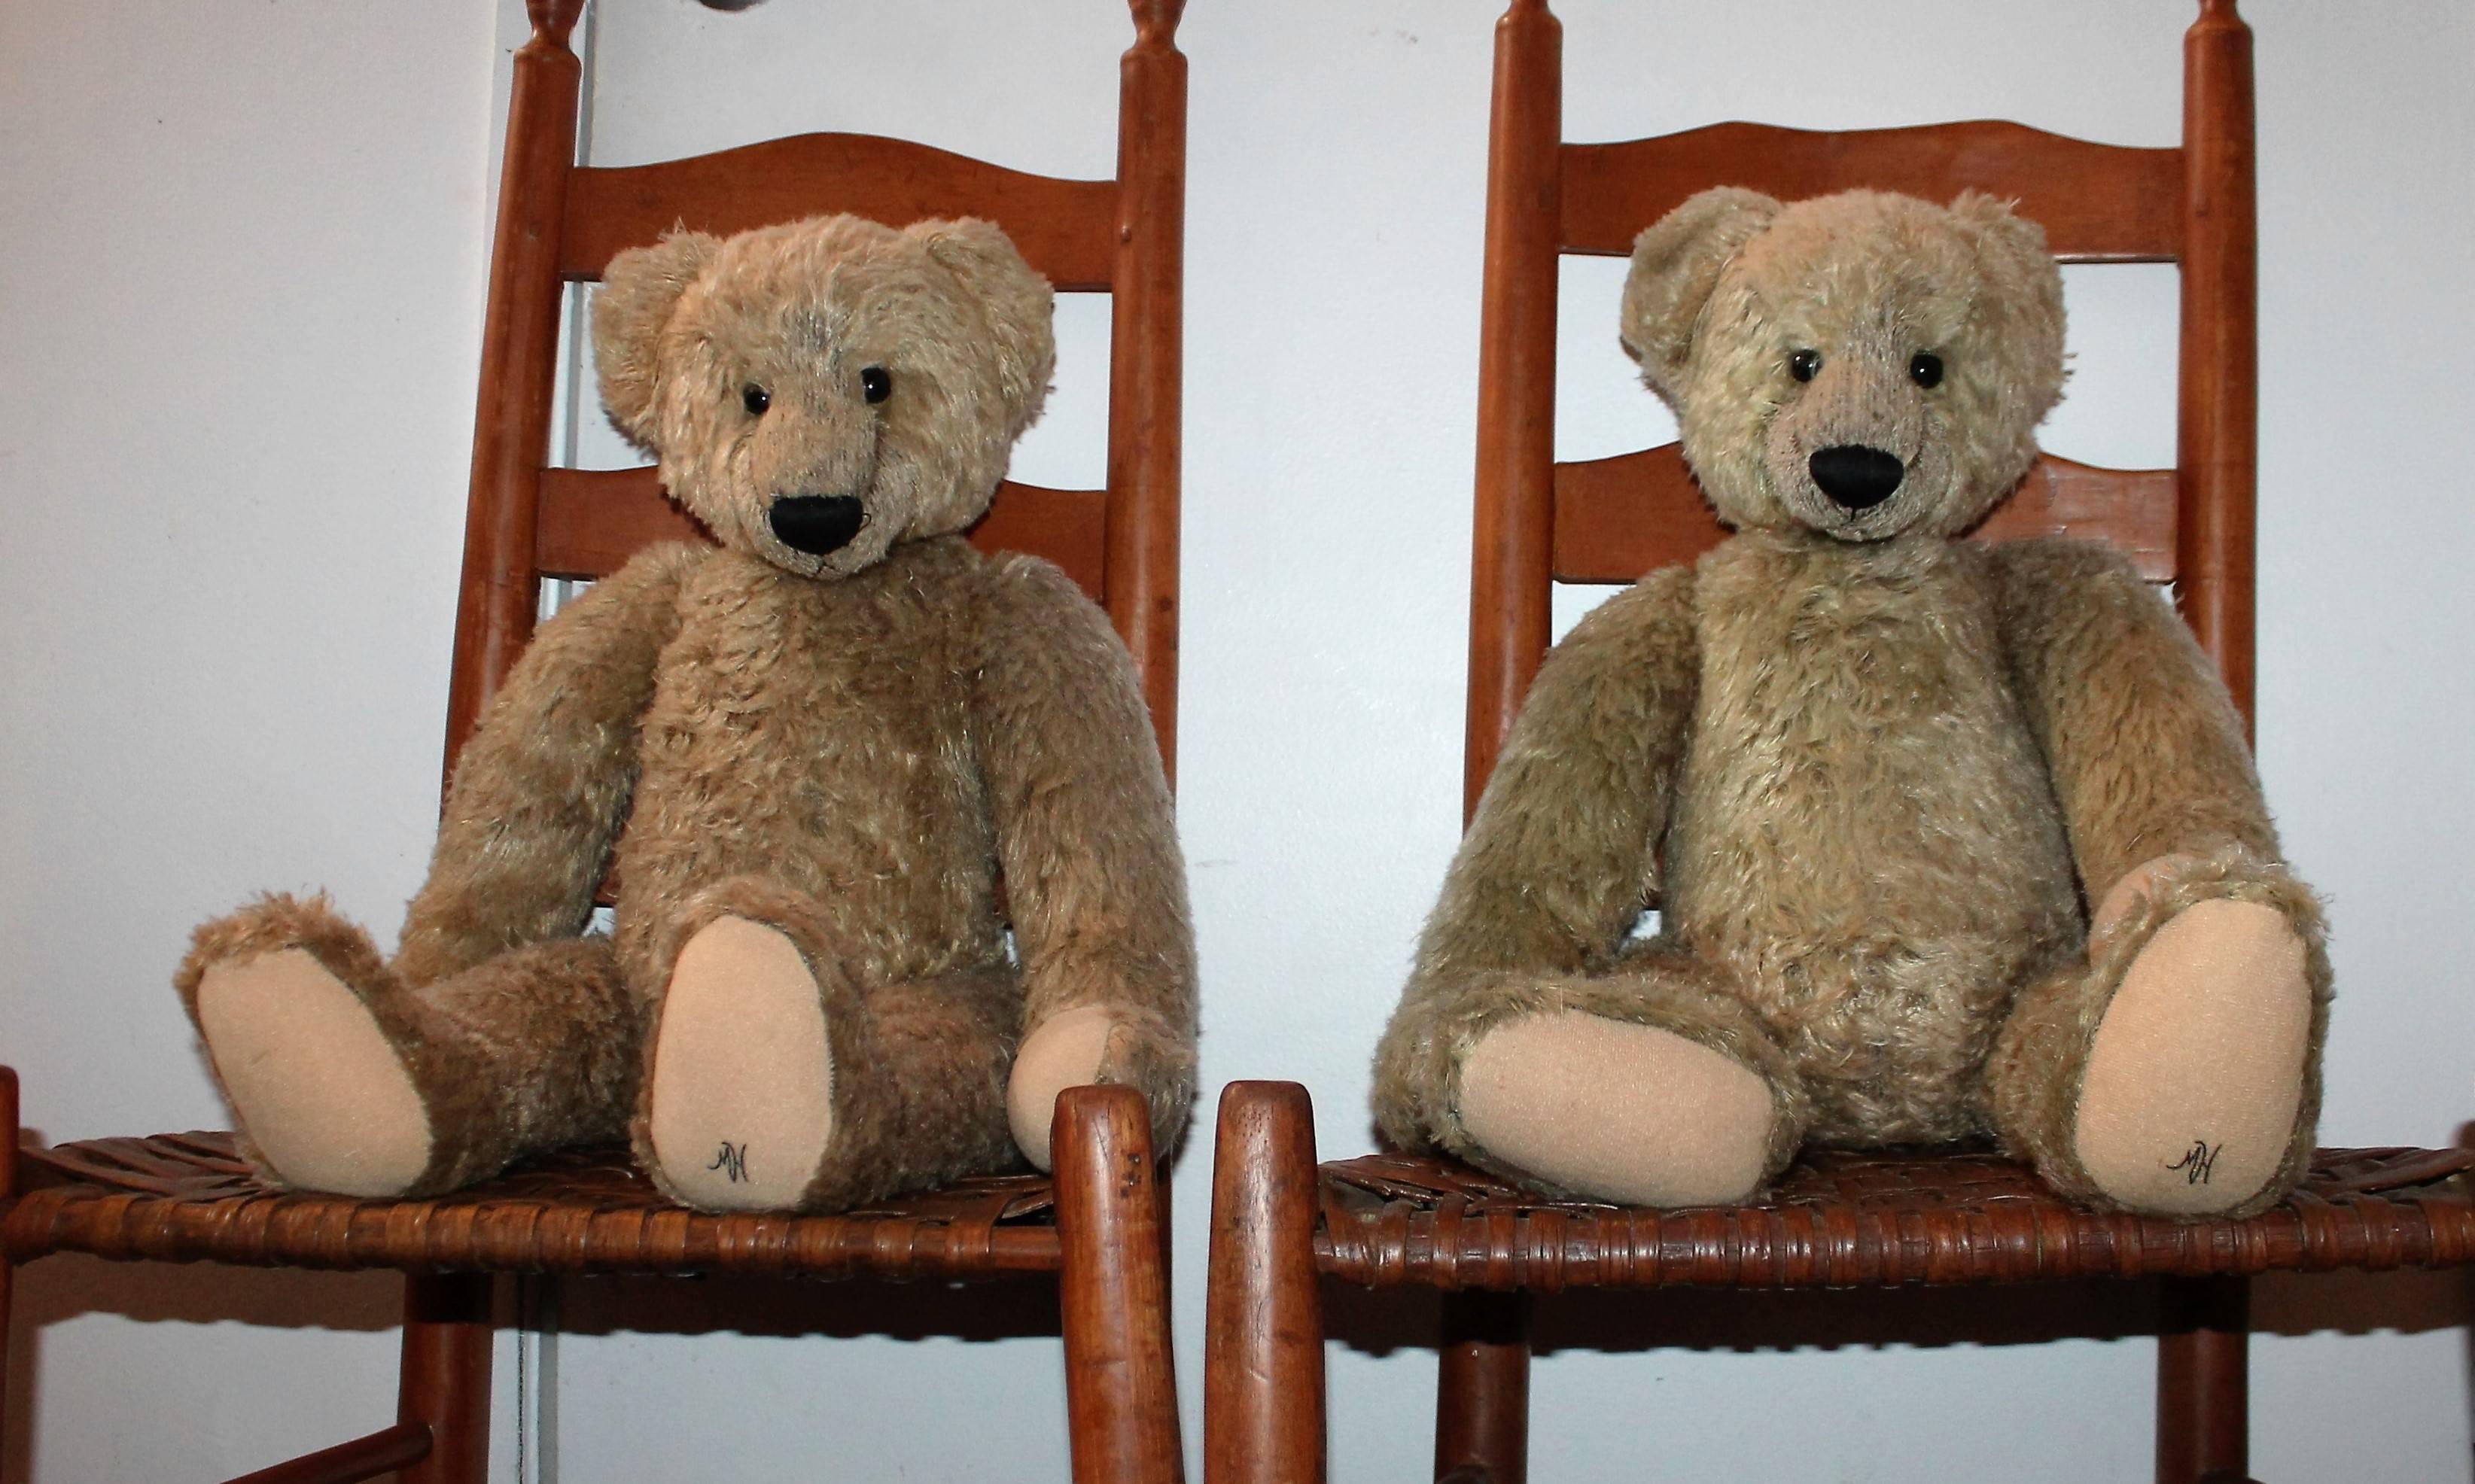 This pair of jointed hump back bear are in good condition with wear consistent with and use. The bears are signed on their front left foot with a M.H. Made by Merrythought Ltd. for Harrods of London, England. One bear is more faded that the other.